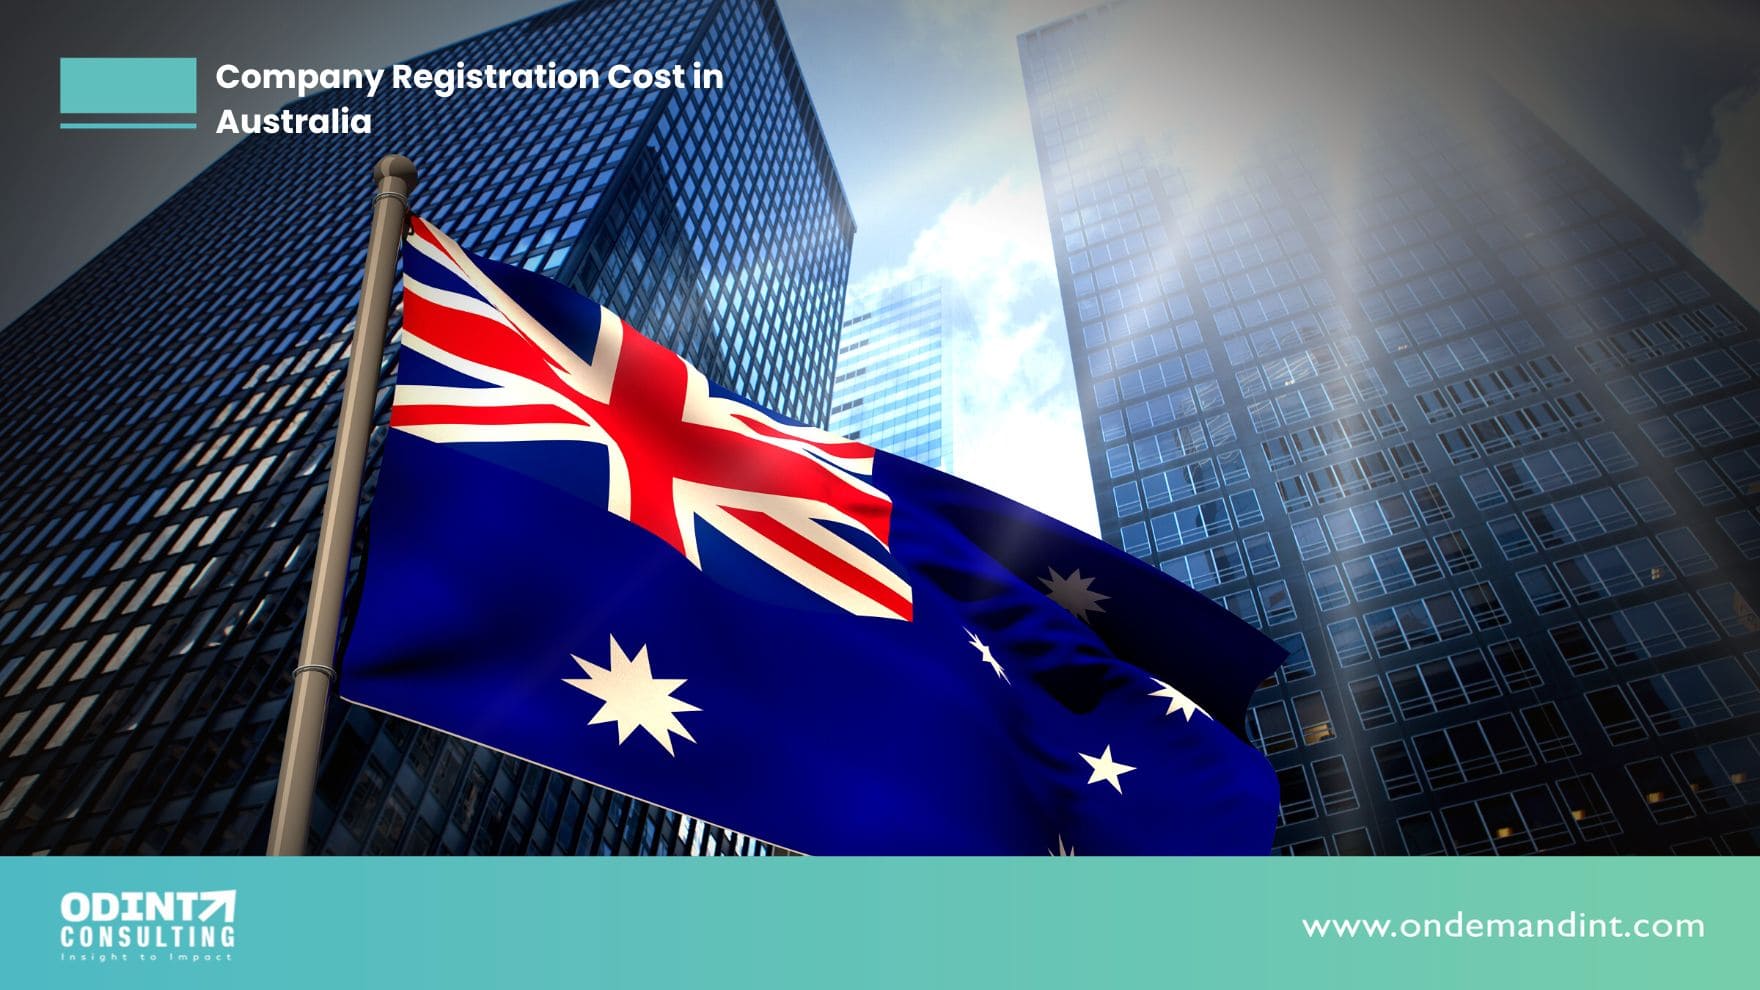 How Much is The Company Registration Cost in Australia?